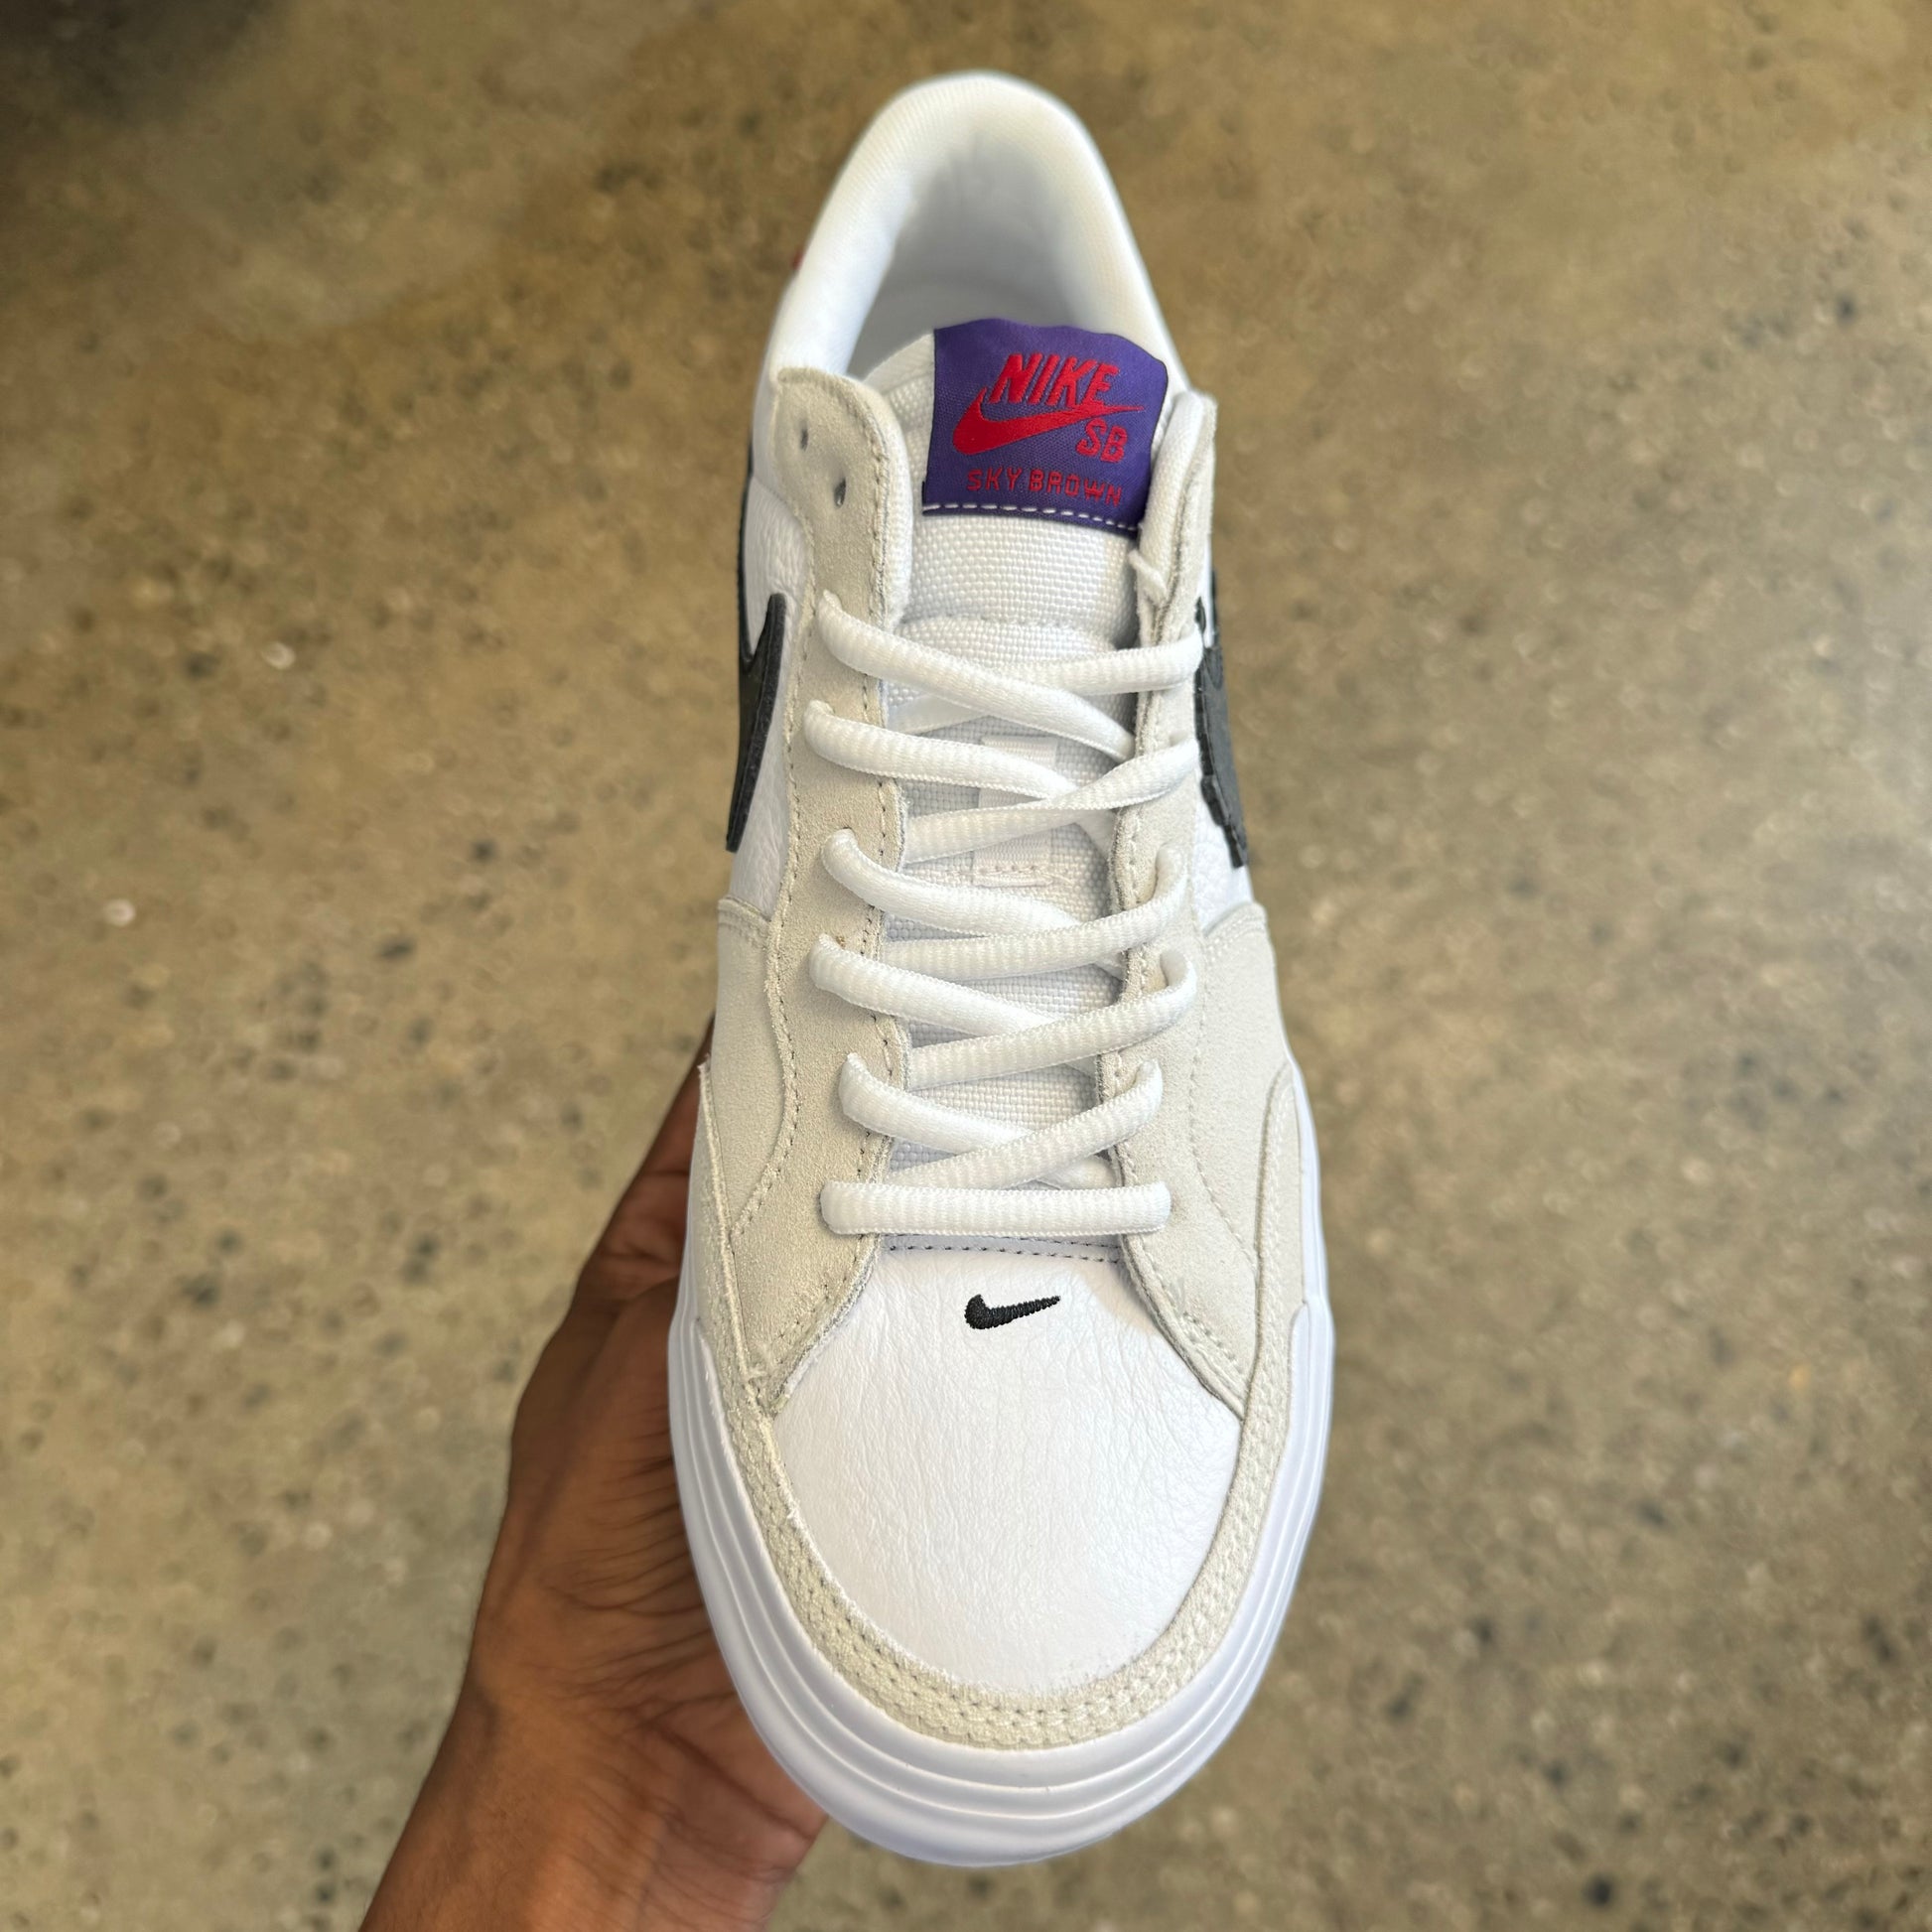 front view of the shoe. white shoe laces. purple and red label on tongue